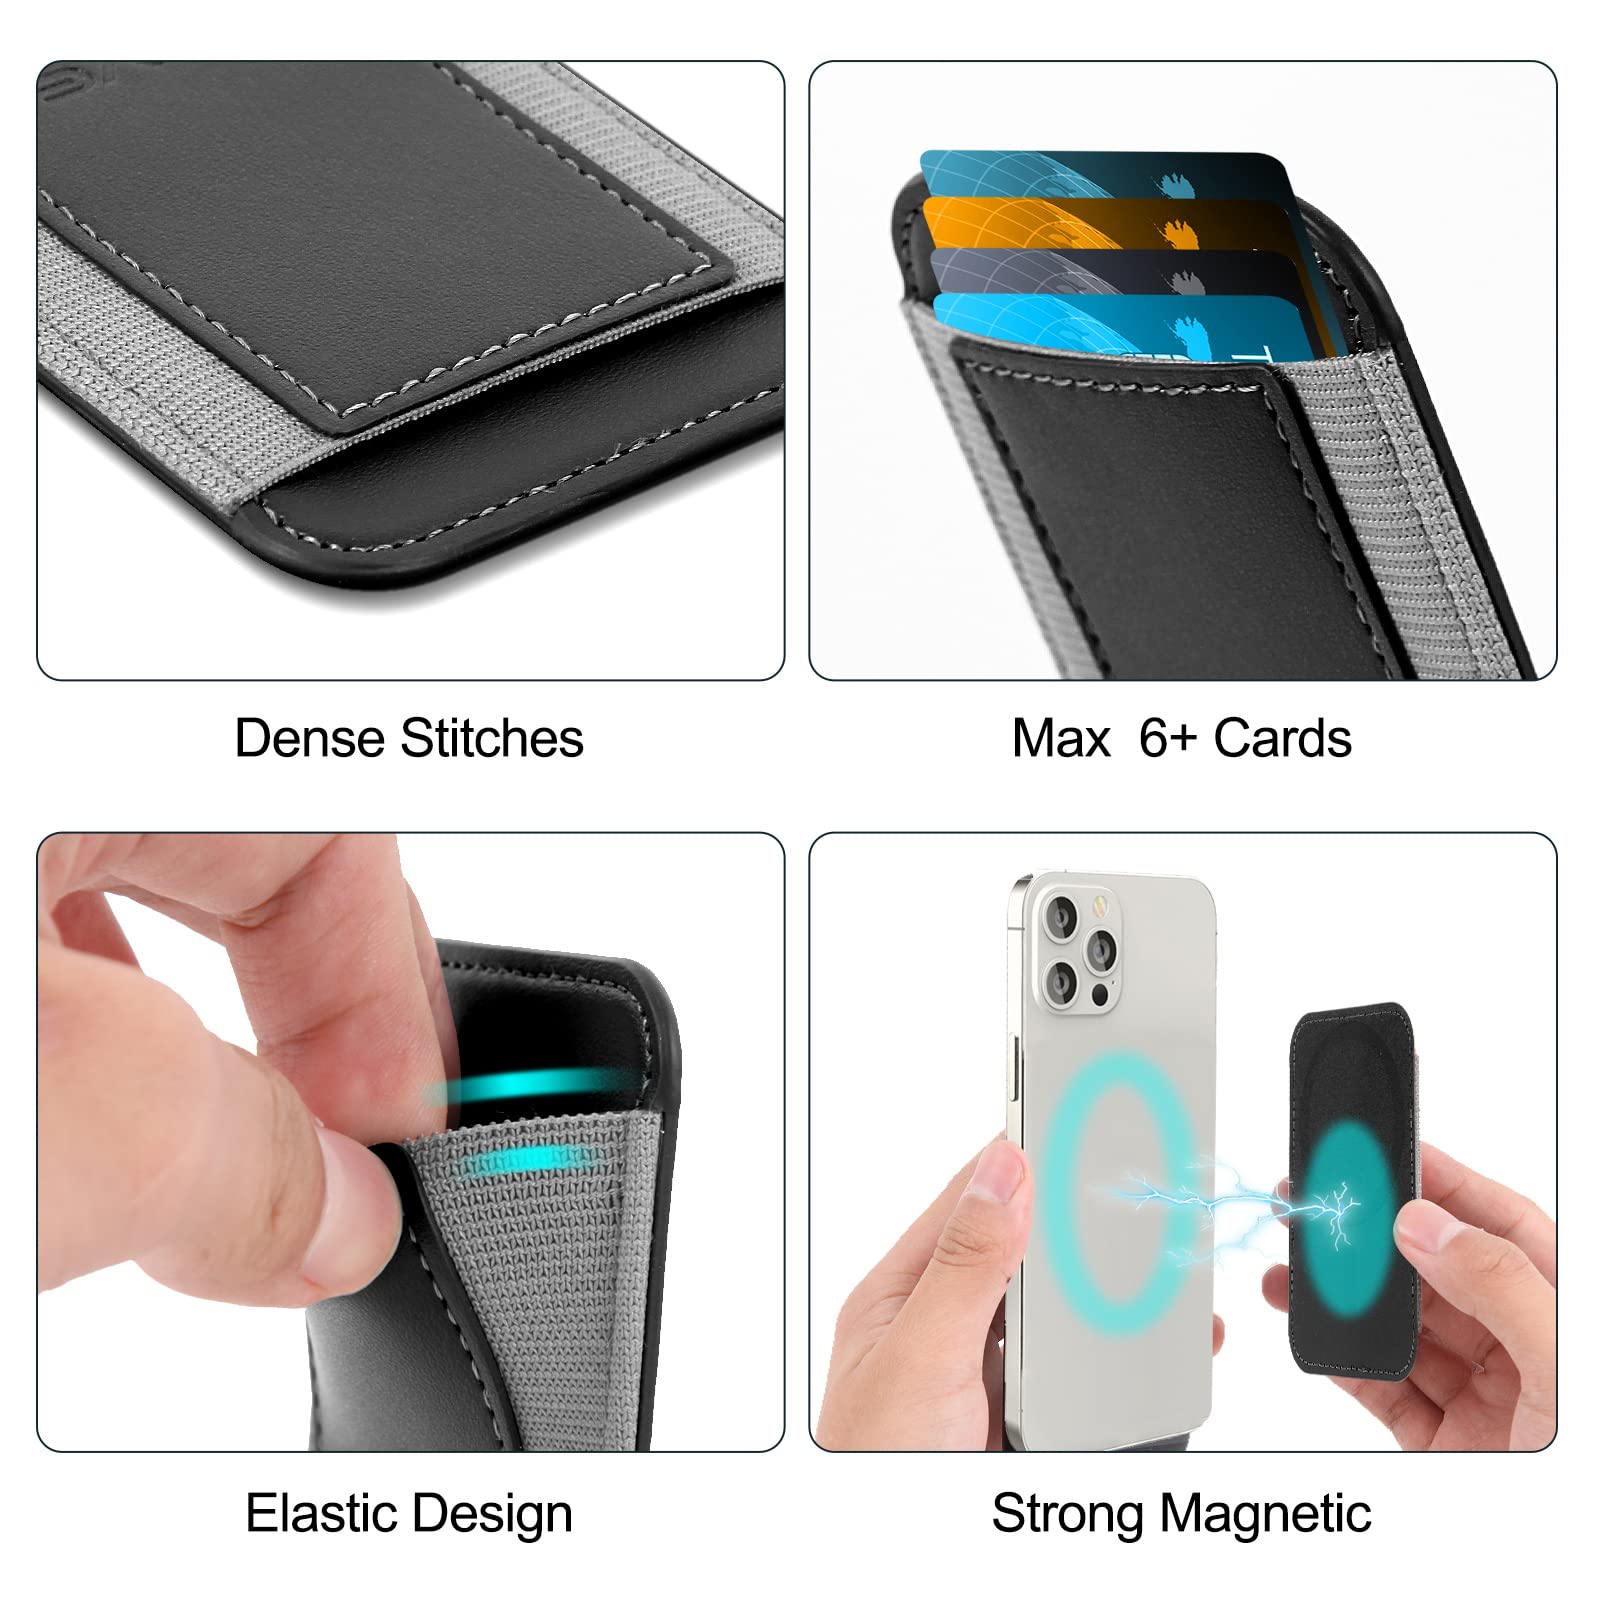 Magnetic Card Wallet Holder for Apple Magsafe, Magnetic Card Holder Magsafe for iPhone 12 iPhone 13/14 Magsafe Wallet, Mag-Safe Leather Wallet for Back of iPhone 14/13/ 12 Series, Fit 6 Cards, Black